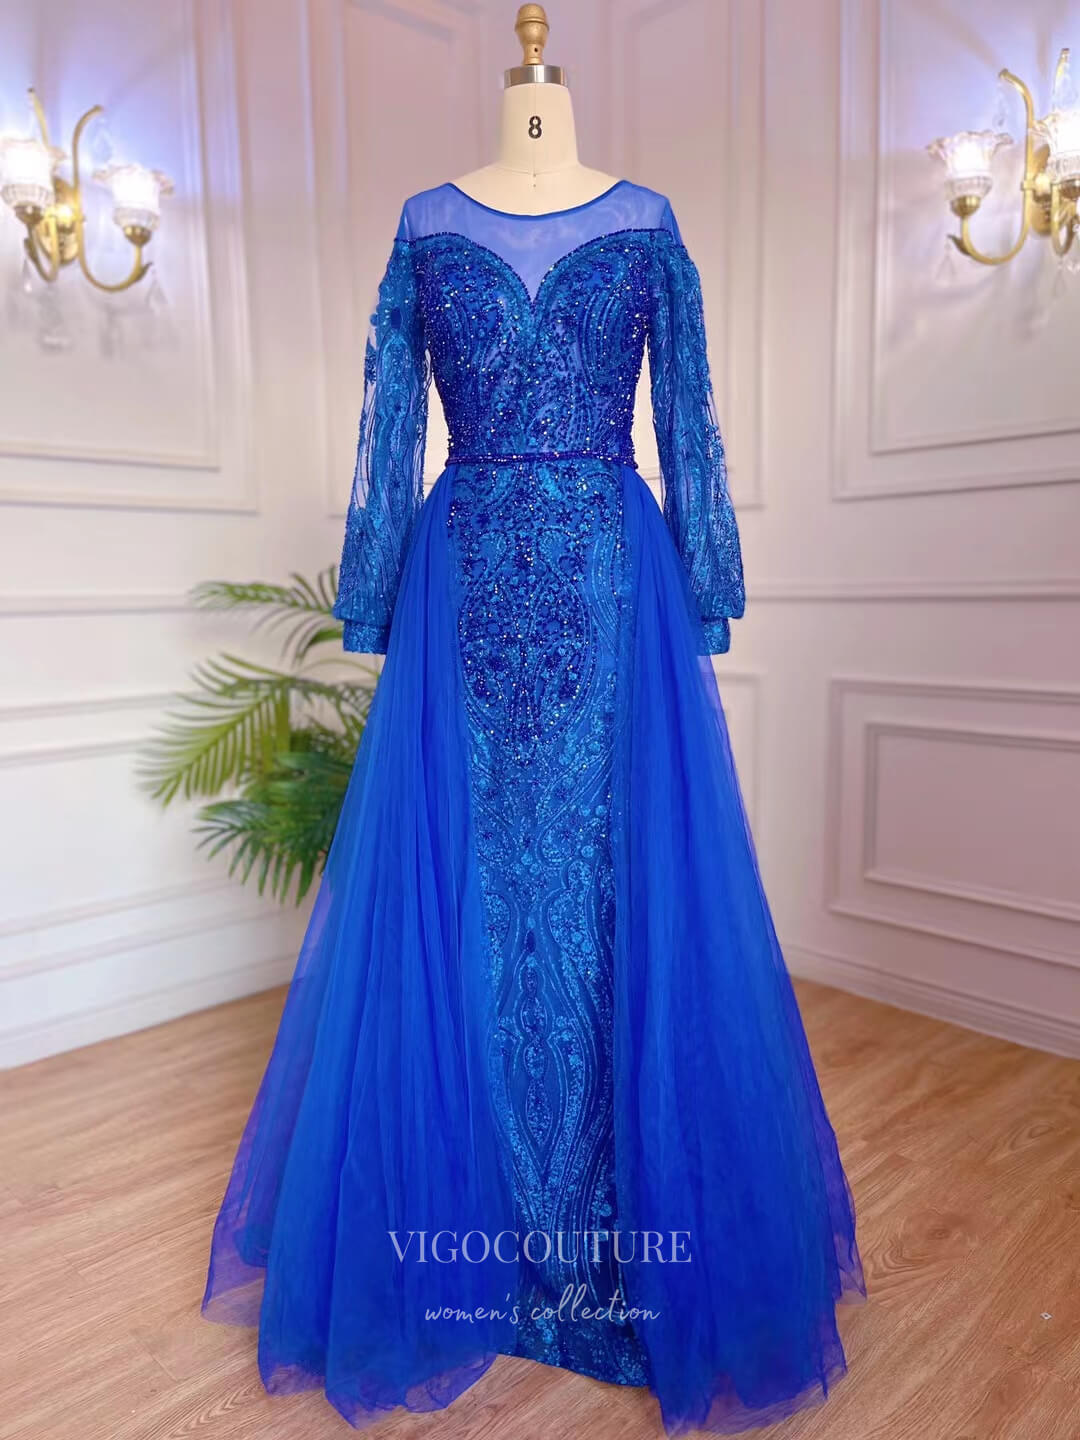 Beaded Lace Prom Dresses Long Sleeve Overskirt Mother of the Bride Dresses 22117-Prom Dresses-vigocouture-Blue-US2-vigocouture